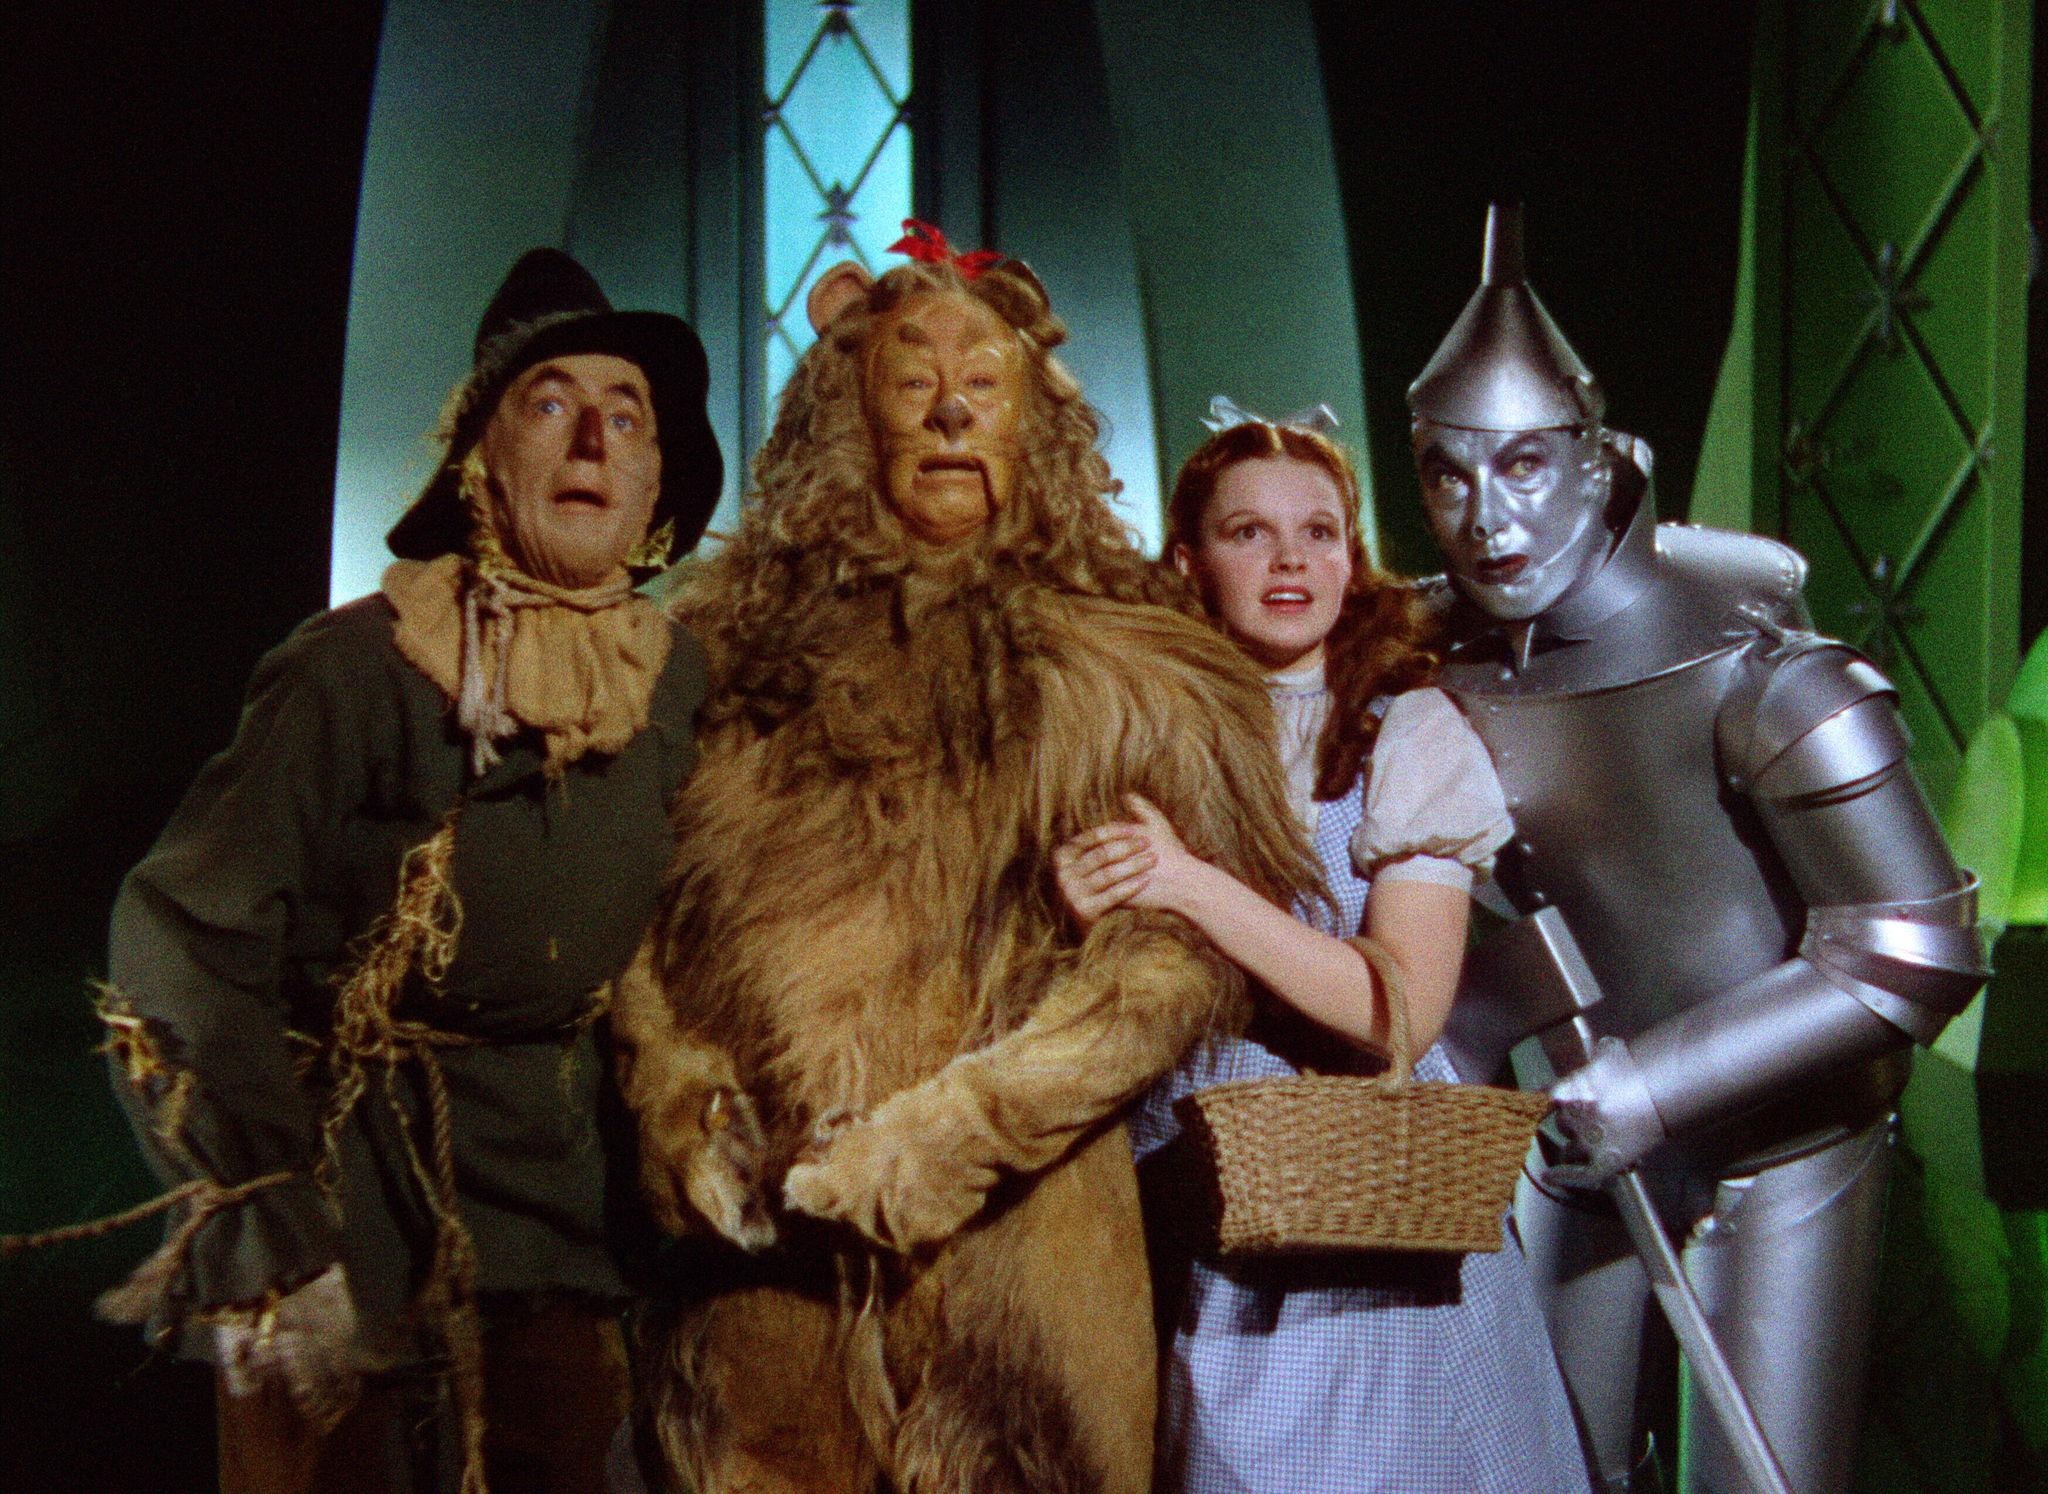 The Wizard of Oz, HD wallpaper, Classic movie, Background image, 2050x1500 HD Desktop